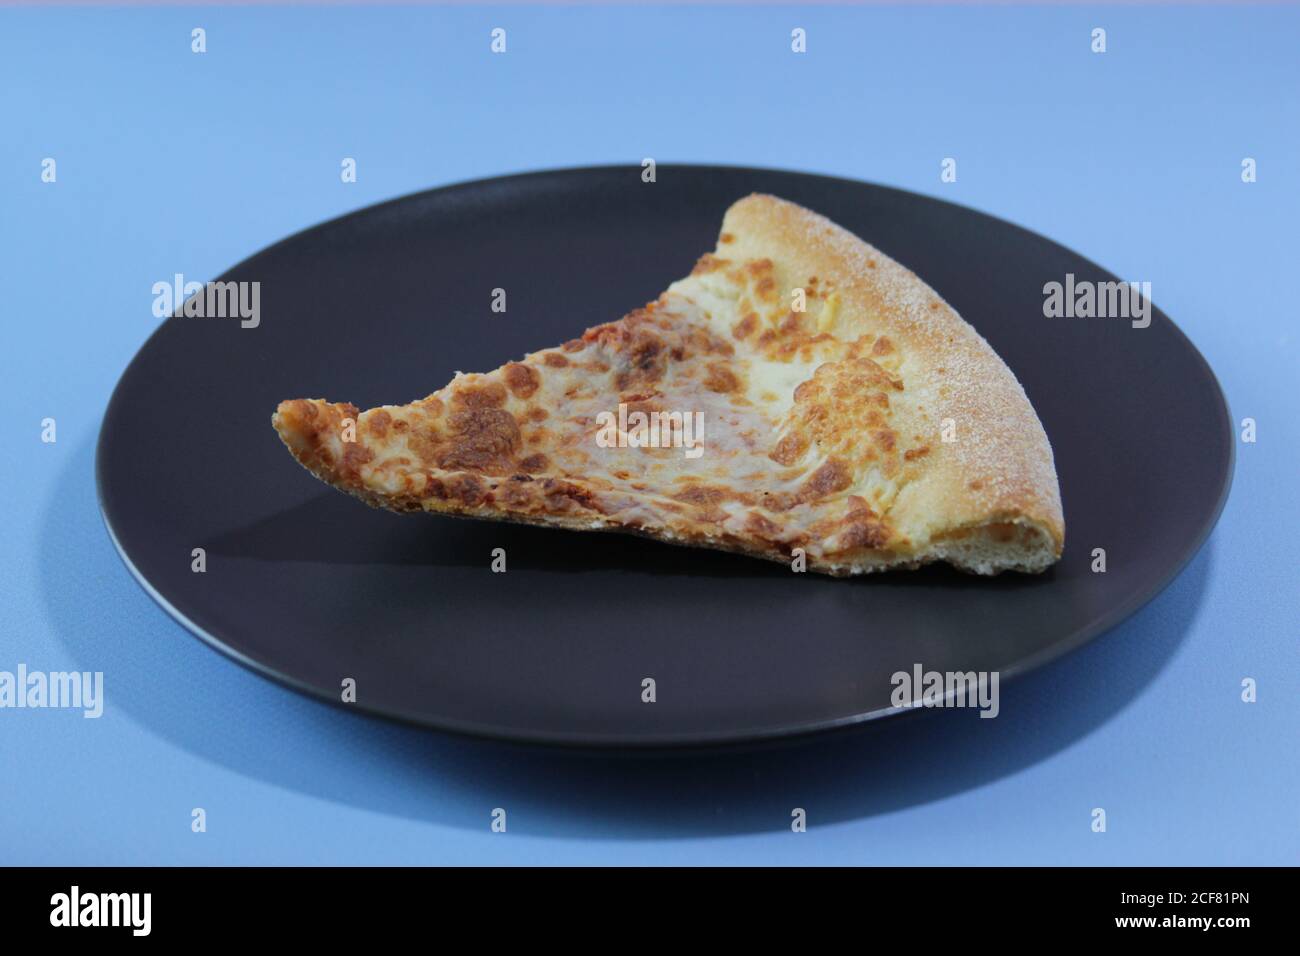 Dried slice of pizza on a black table on a blue background. Food concept. Stock Photo